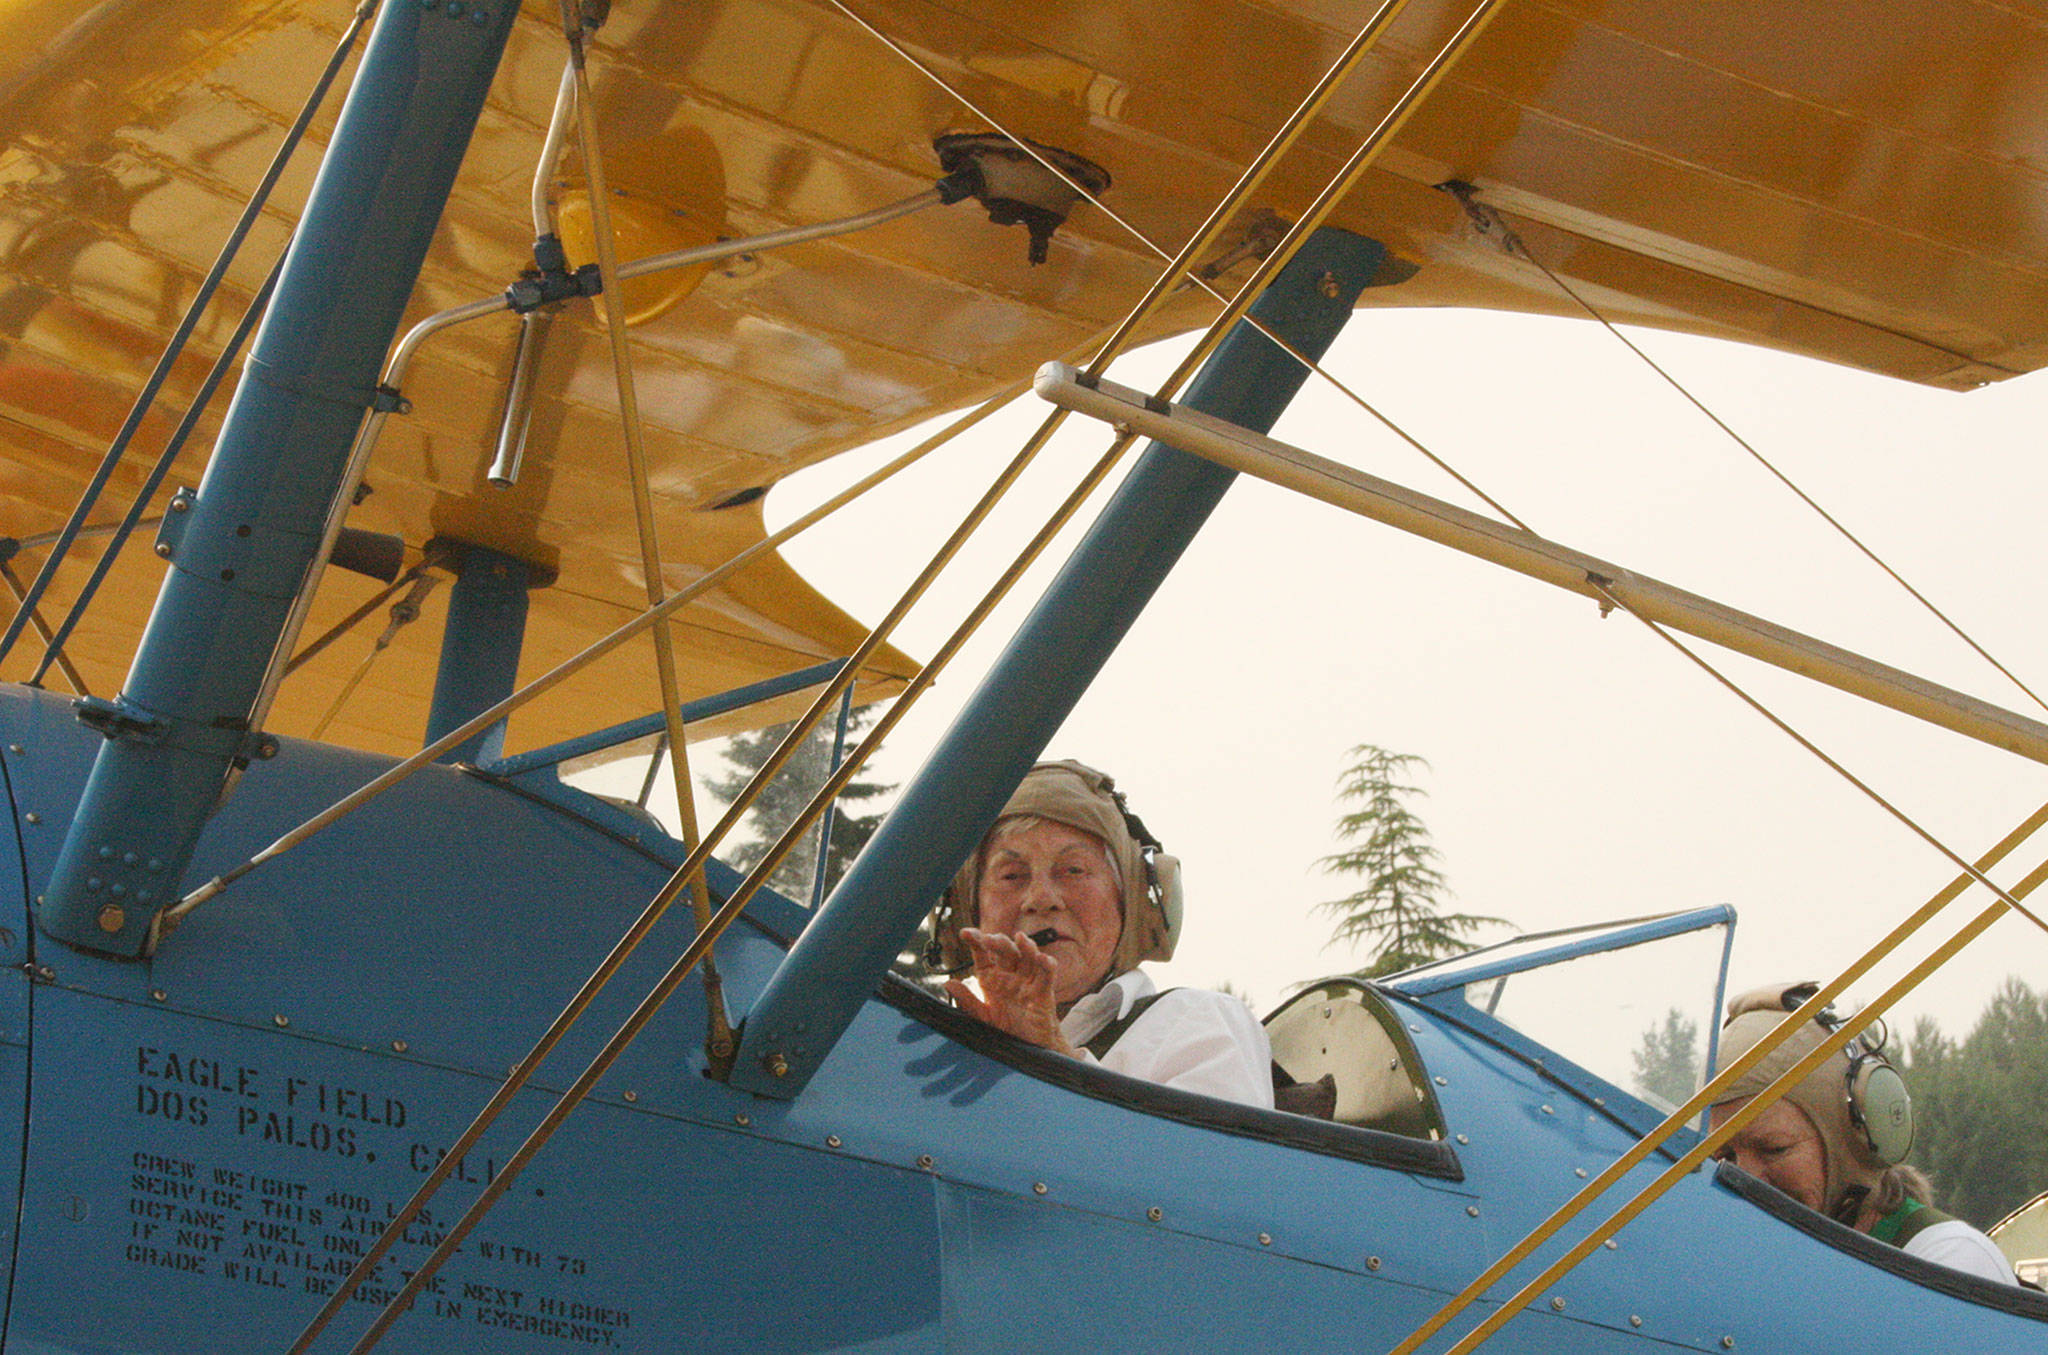 Betty Dybbro, a World War II fly girl, recently celebrated her 95th birthday by flying a Piper Cub and a Stearman, planes that originated around the time of the war. The Cub is a monoplane, while the Stearman is a popular air show biplane. Photos by Kevin Hanson